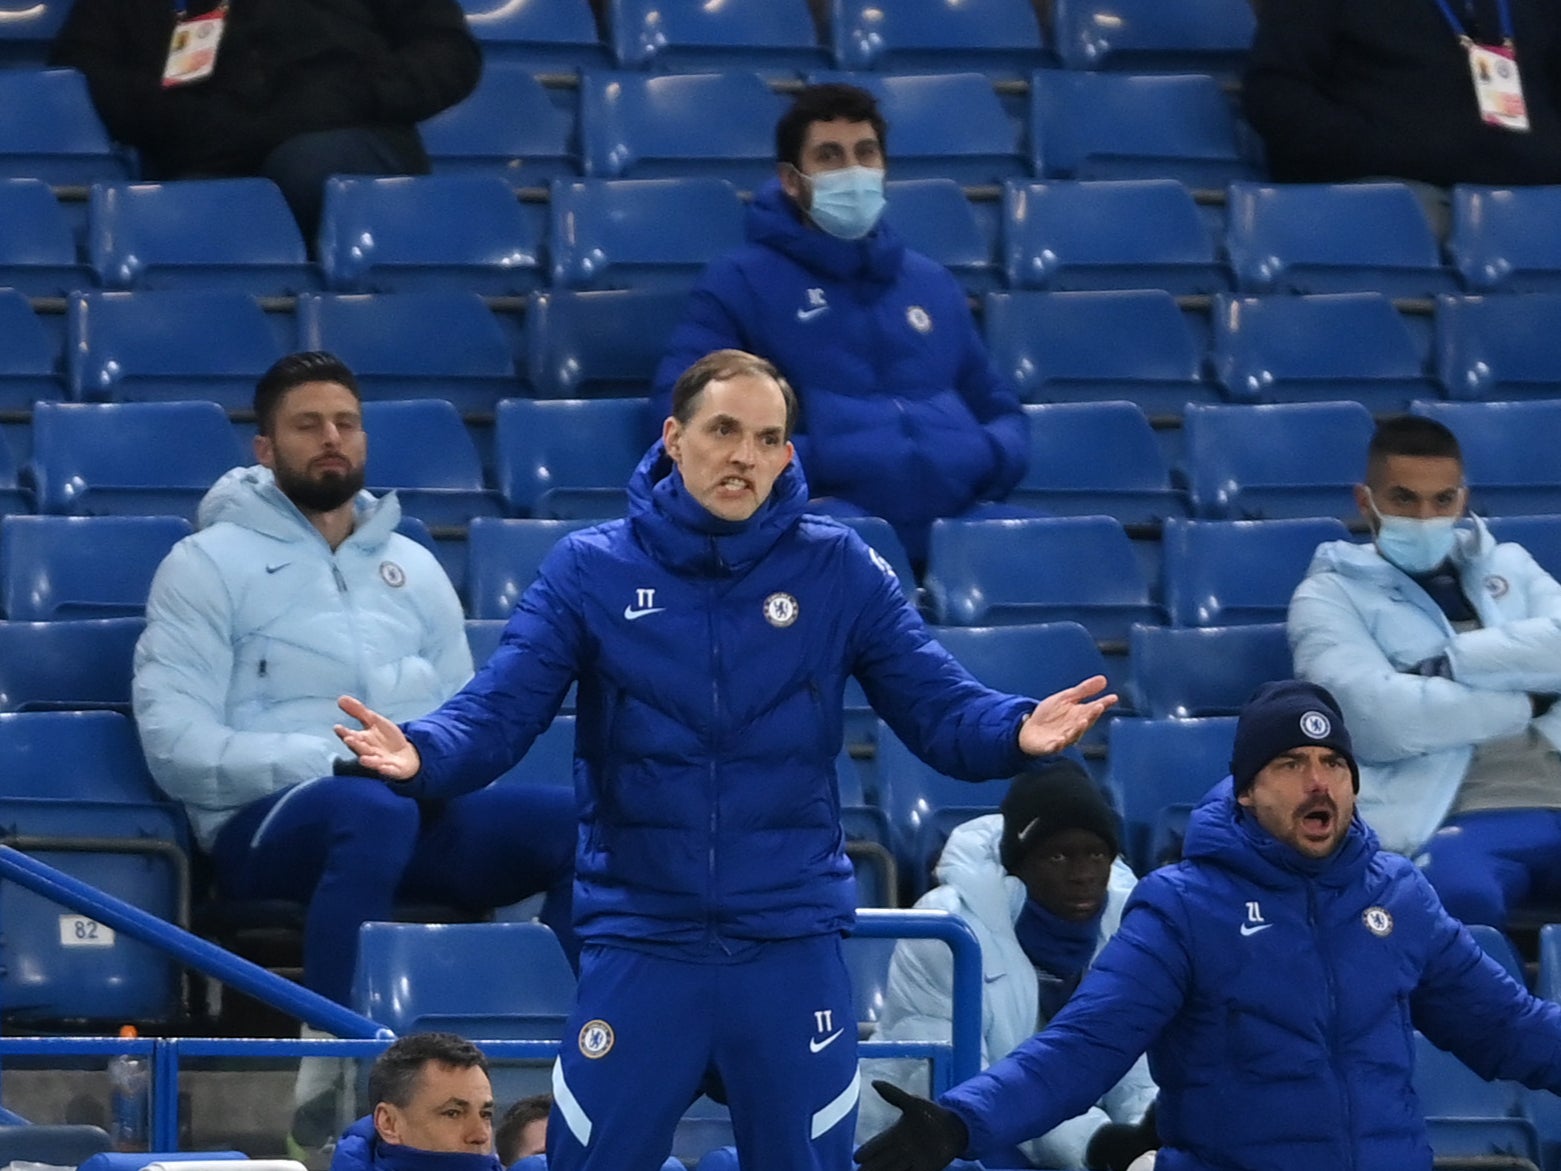 Chelsea coach Thomas Tuchel on the sidelines during his team’s win over Everton